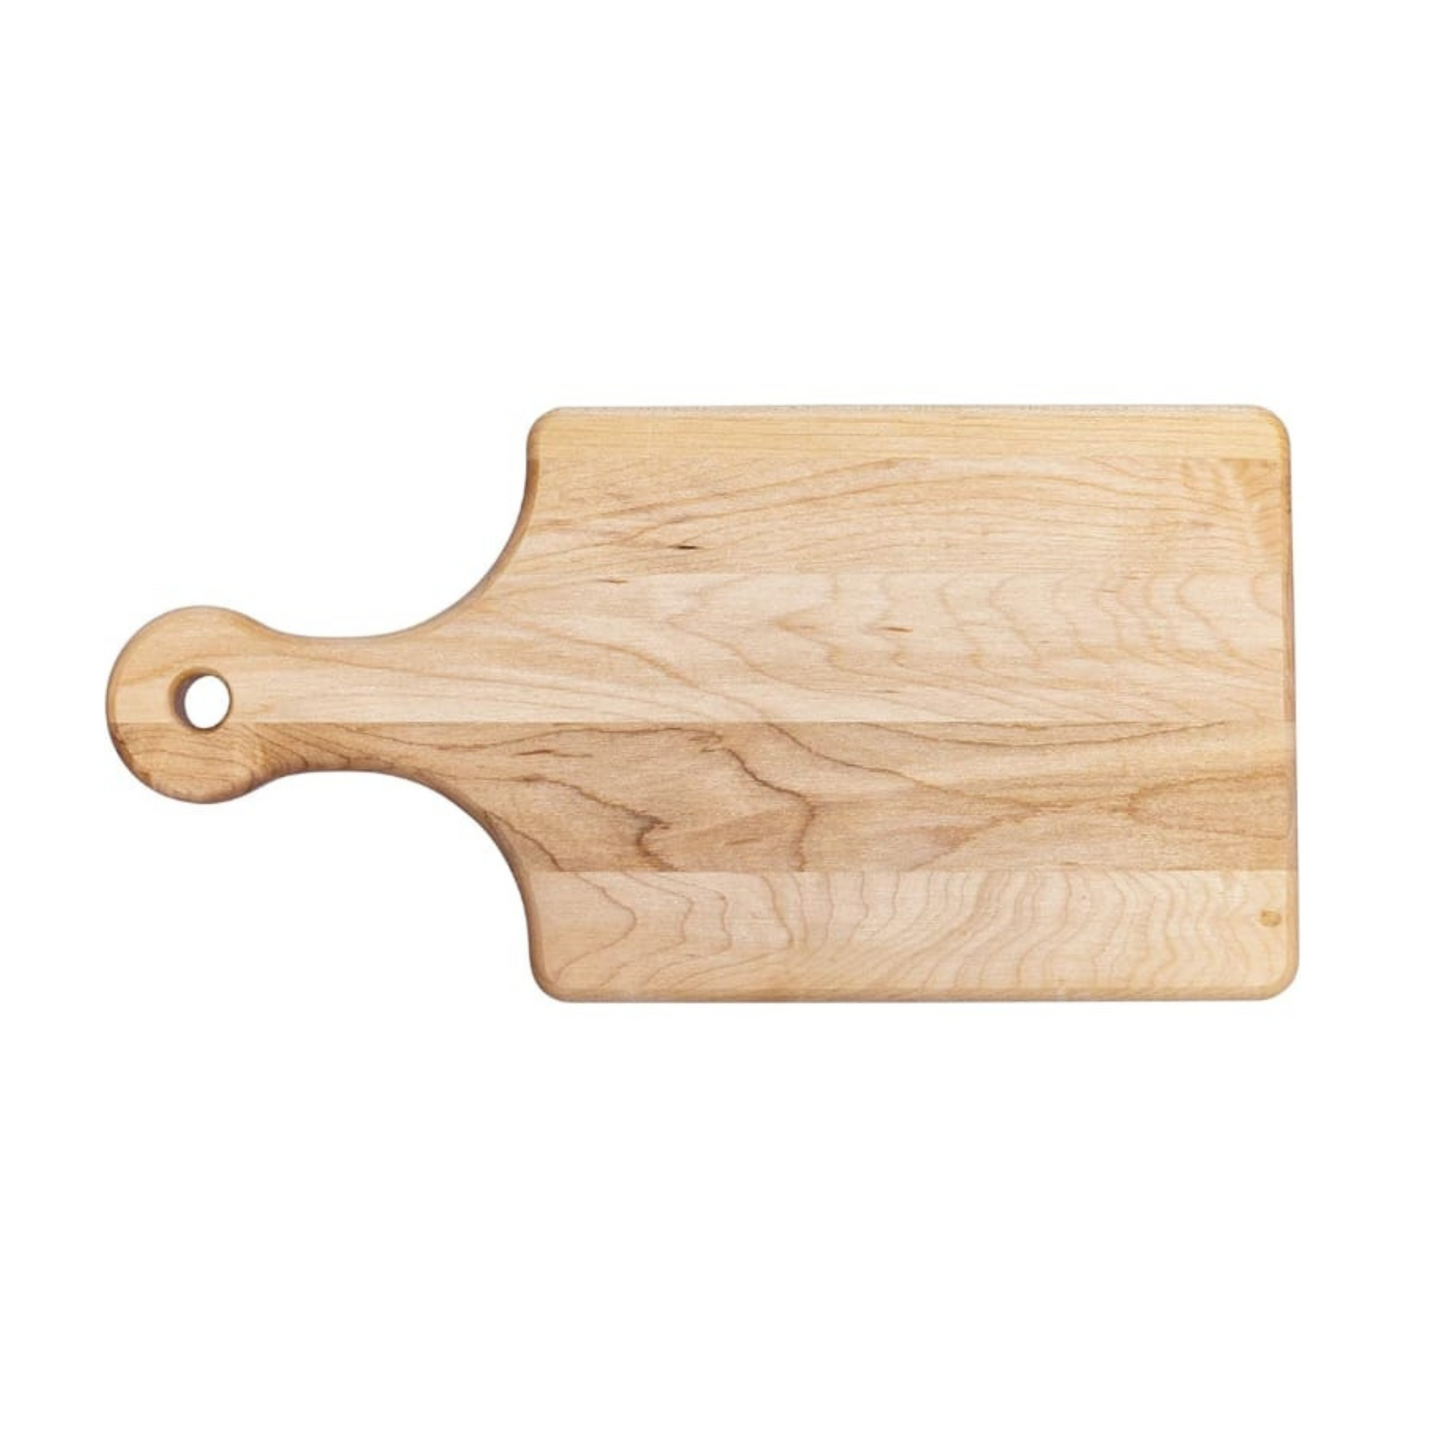 Thankful Grateful Blessed Cutting Board - Premium Cutting Boards from Hipster Lasers - Just $70! Shop now at Hipster Lasers